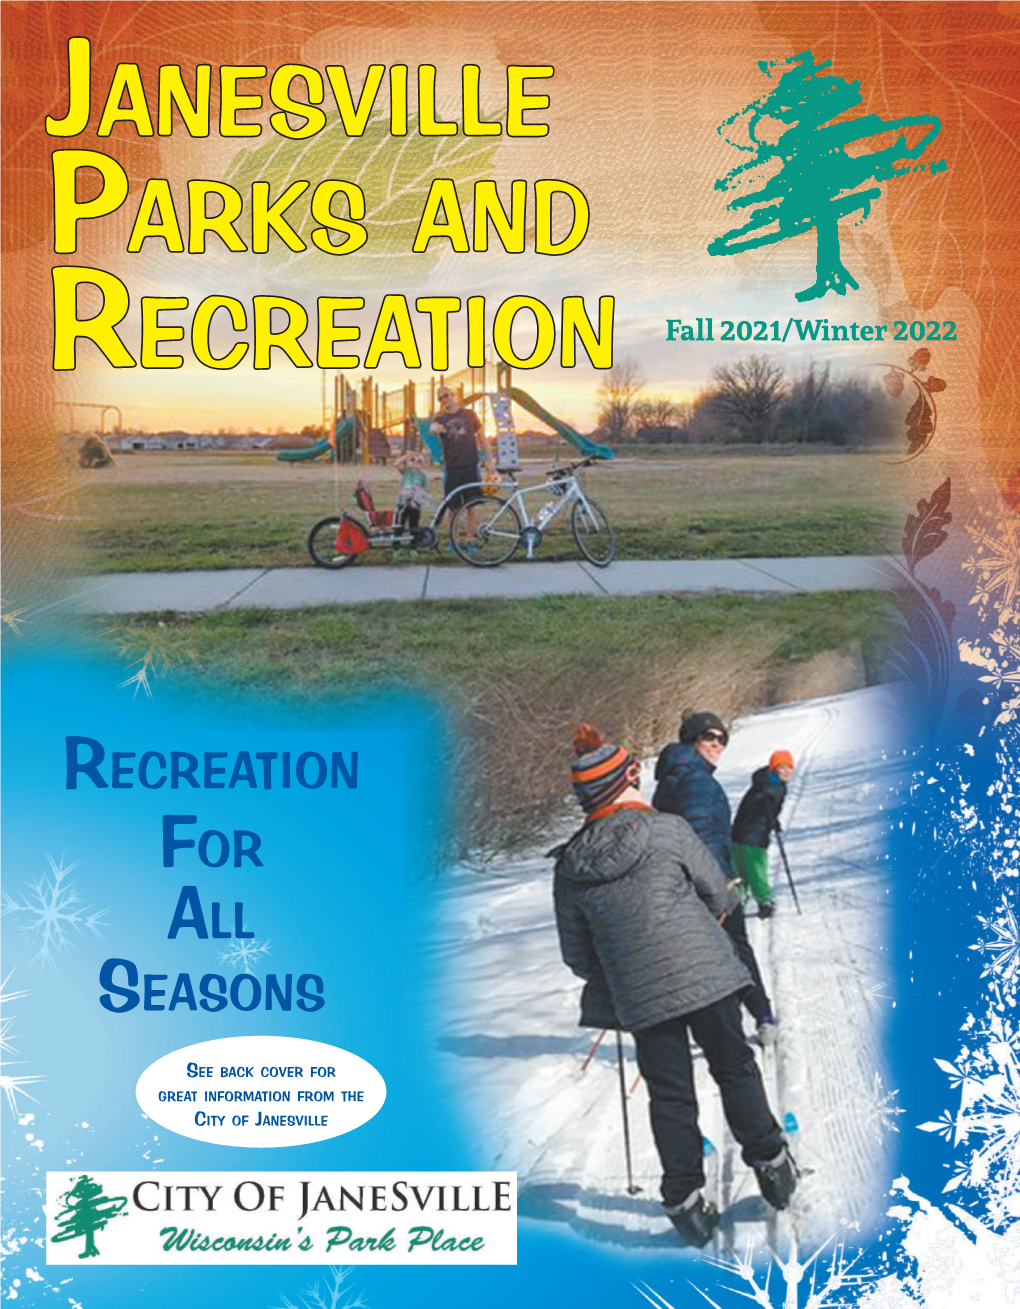 Janesville Parks and Recreation Fall 2021/Winter 2022